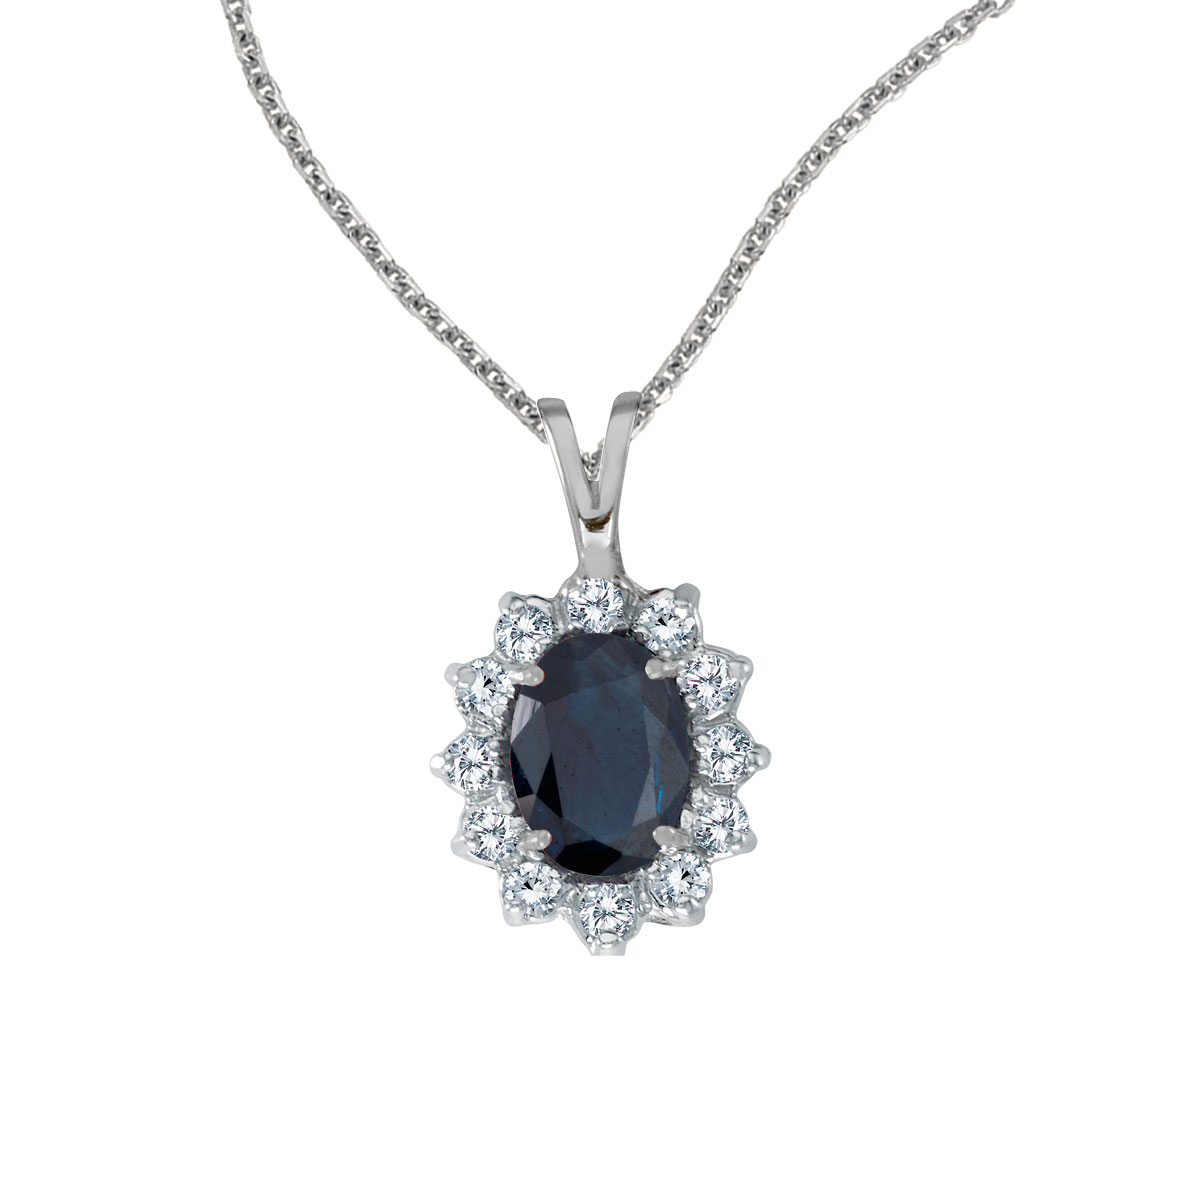 JCX2543: 8x6 mm sapphire surrounded by .30 carats of shimmering diamonds set in 14k white gold. Perfect for birthdays and holidays.